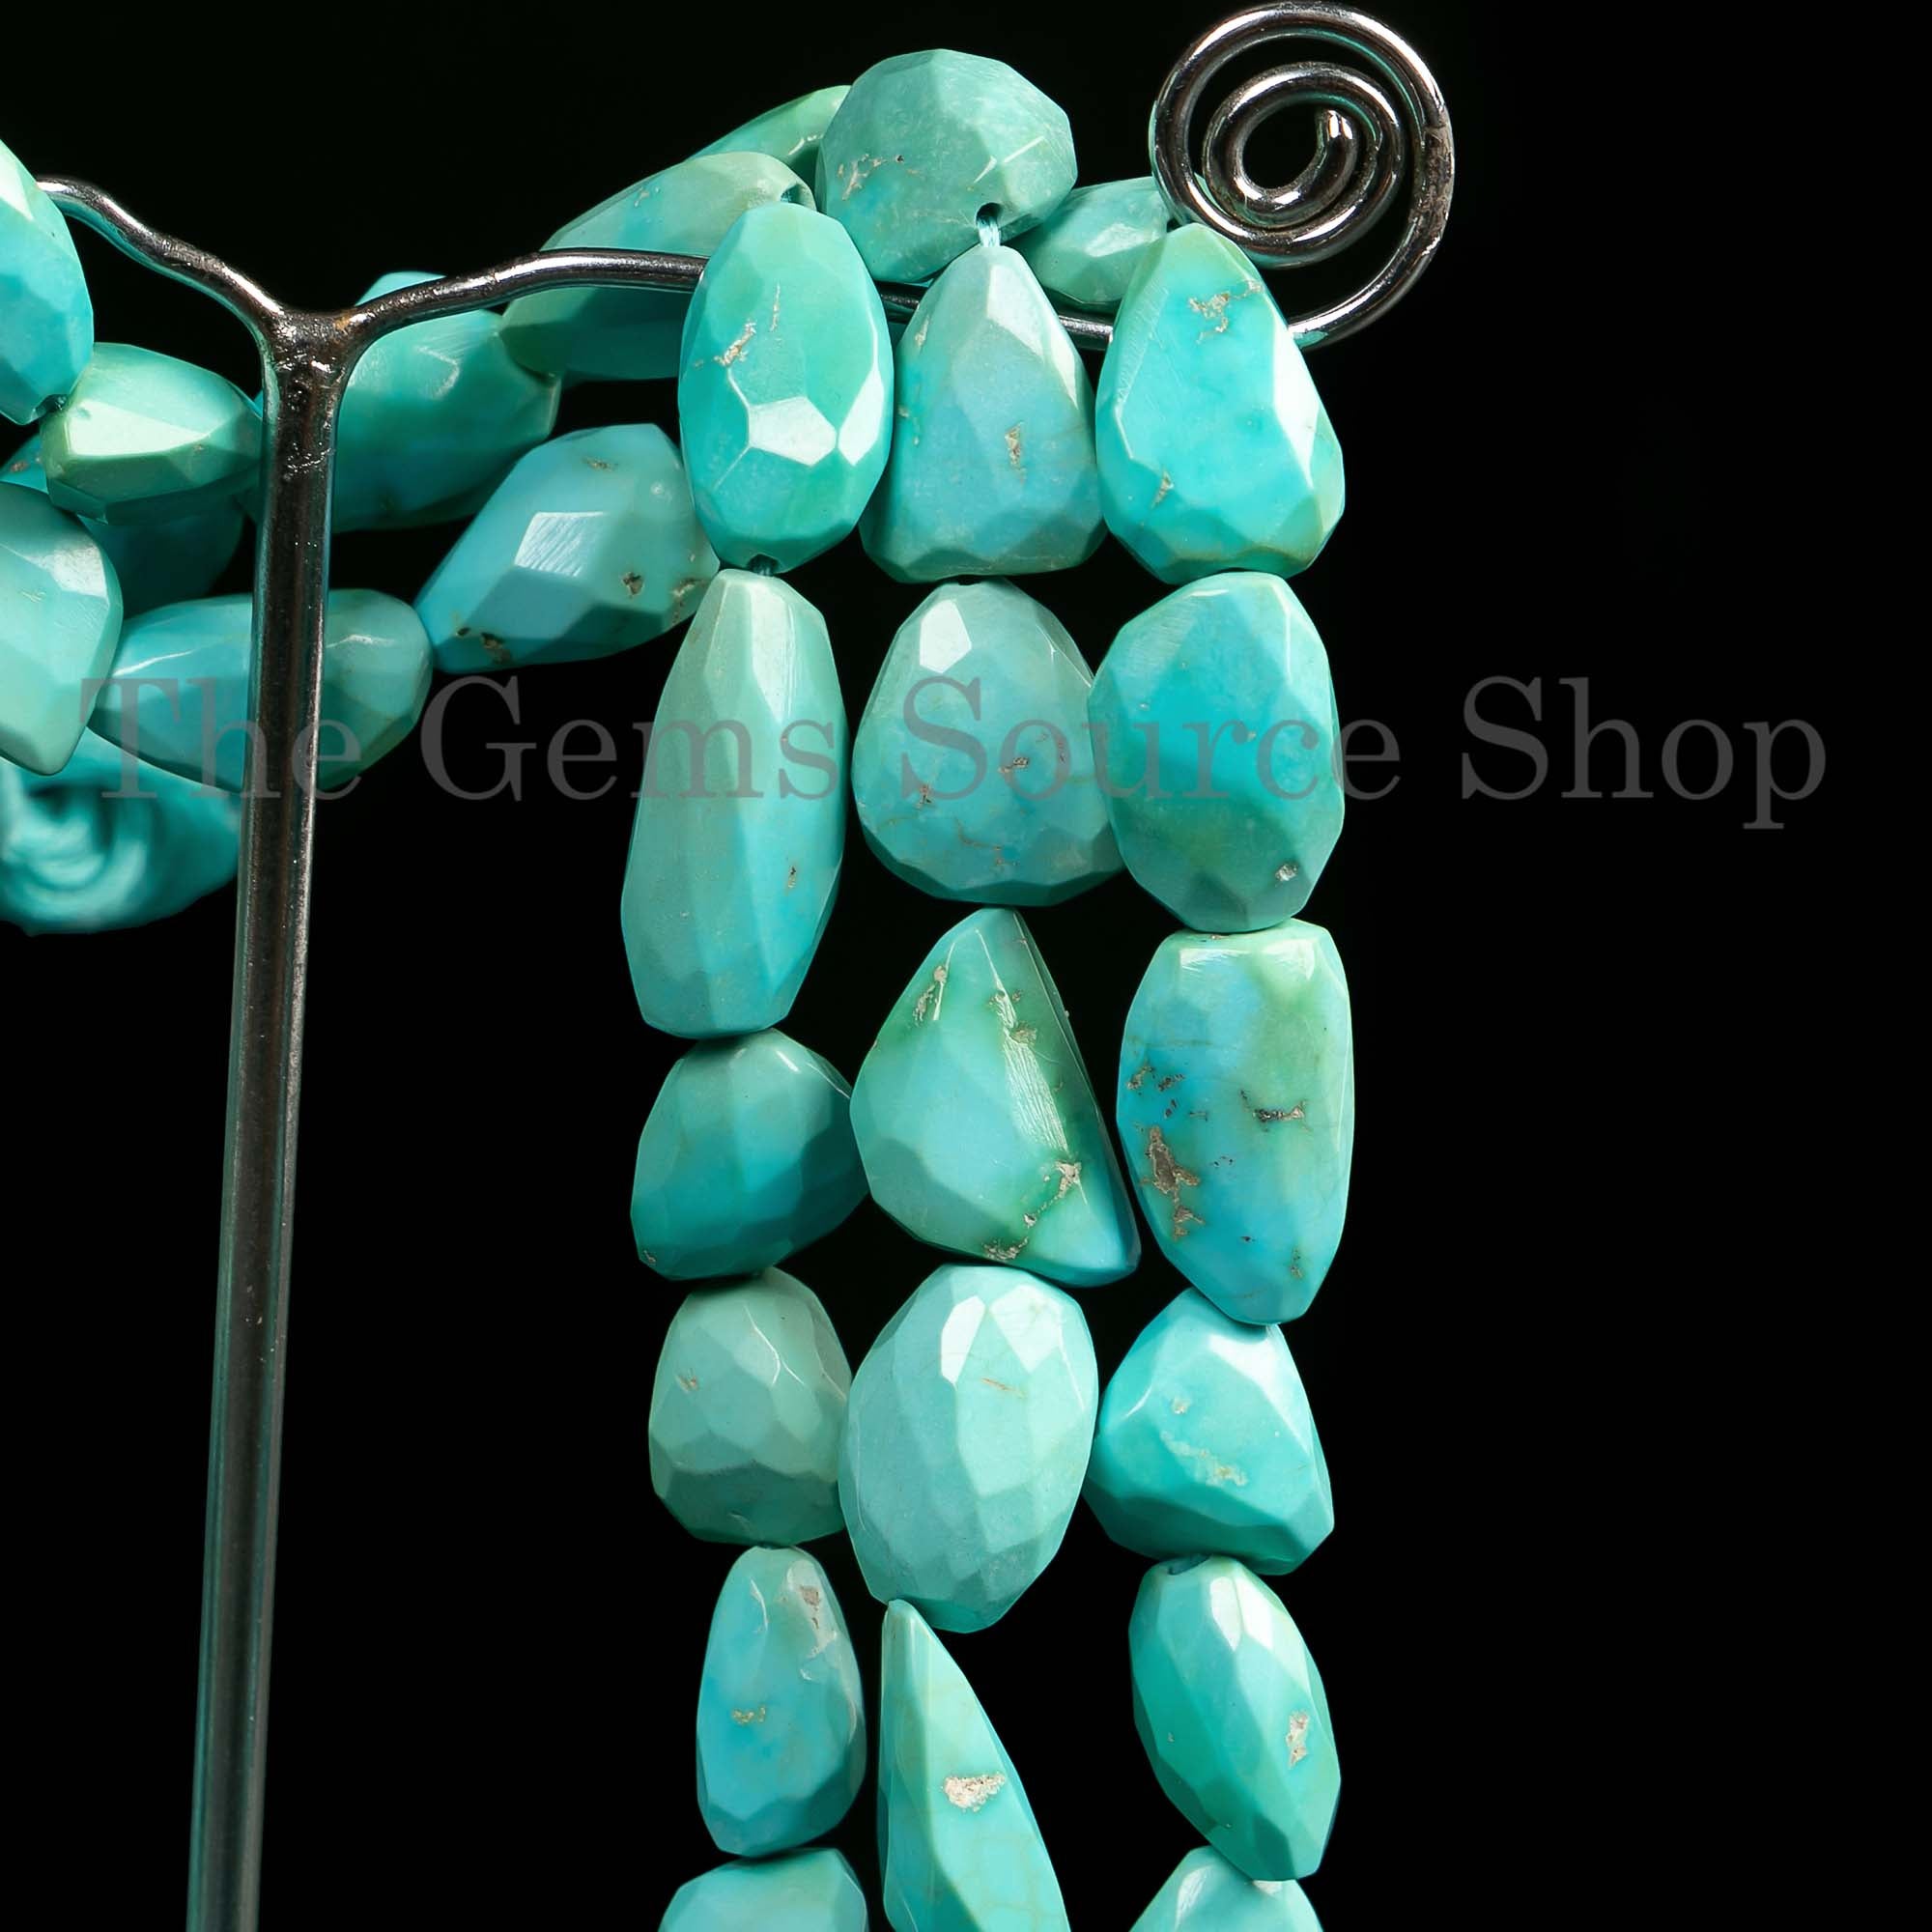 Sleeping Beauty Turquoise Nuggets, Briolette Nuggets, Natural Turquoise Faceted Tumbles, Loose Turquoise Strand